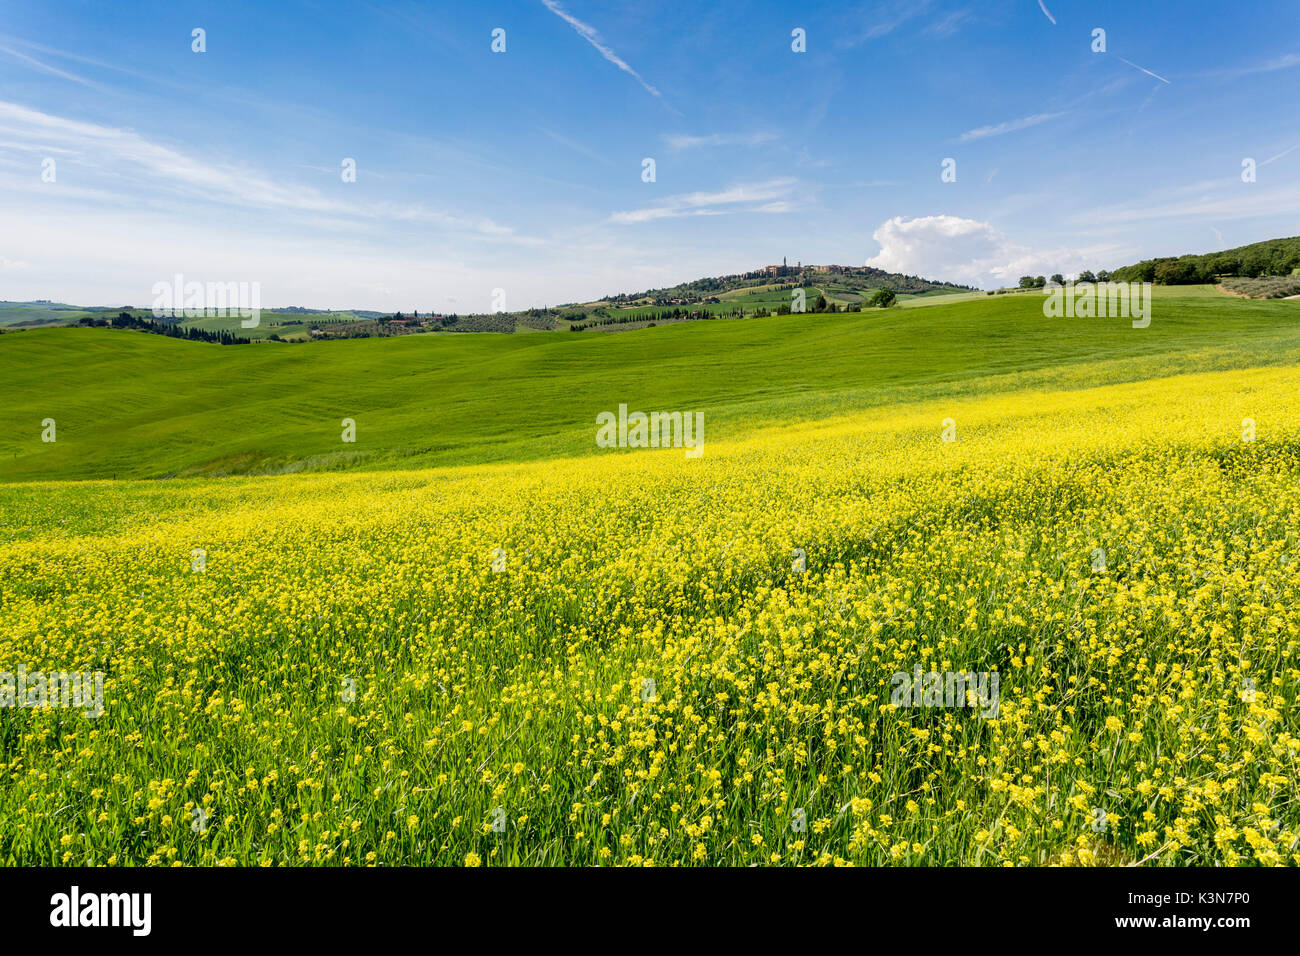 Expanse of rapeseed flowers and the town of Pienza on the background. Orcia Valley, Siena district, Tuscany, Italy. Stock Photo